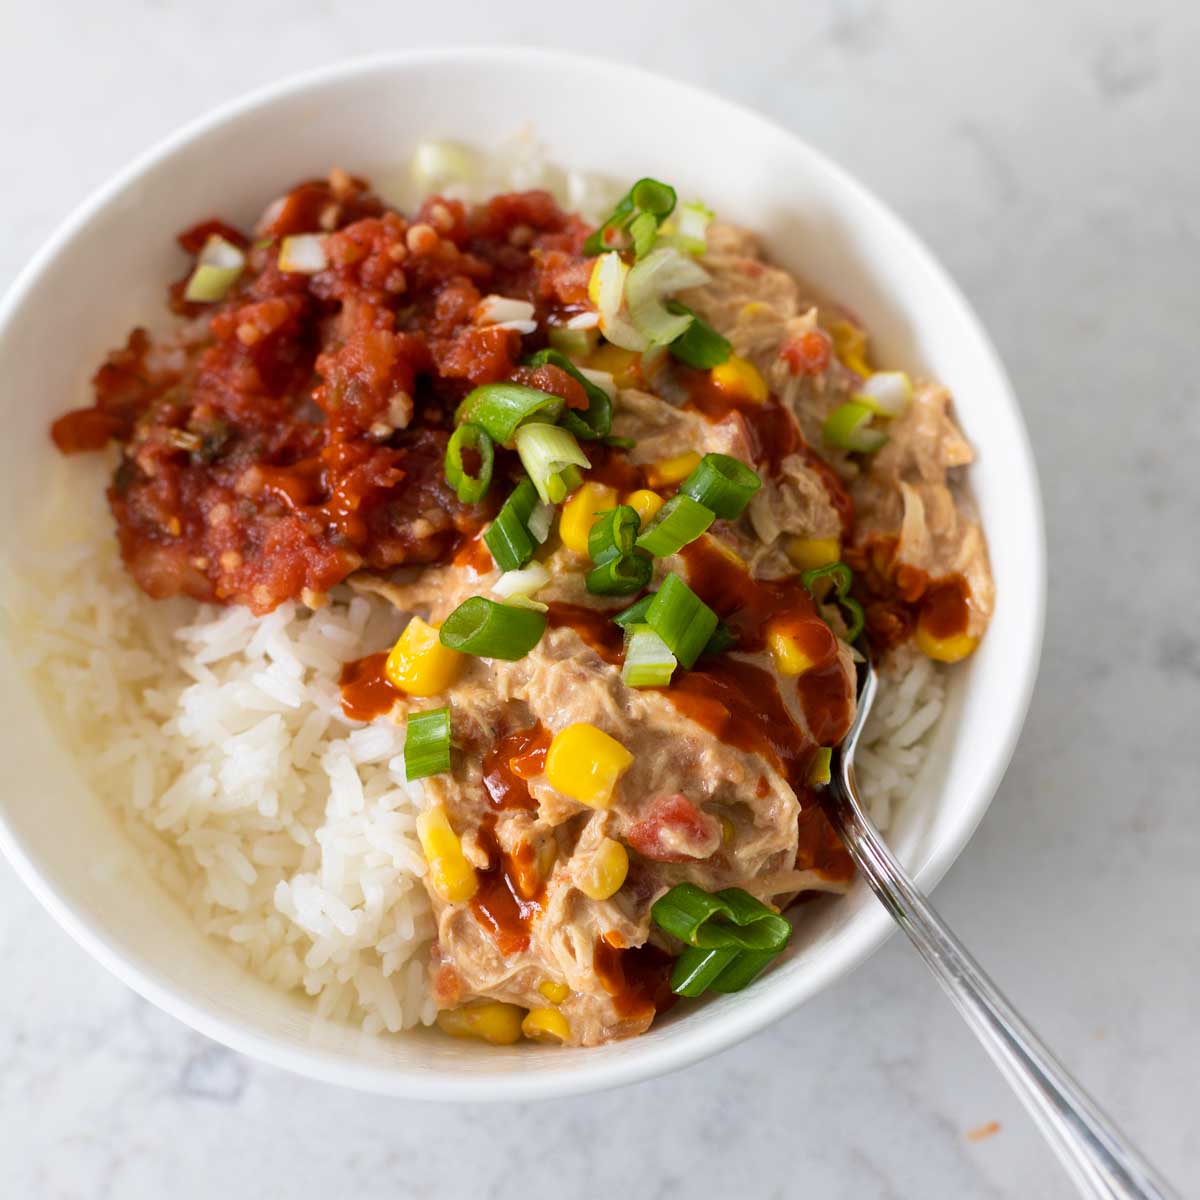 A bowl of rice is topped with the crockpot creamy chicken, salsa, and green onions.